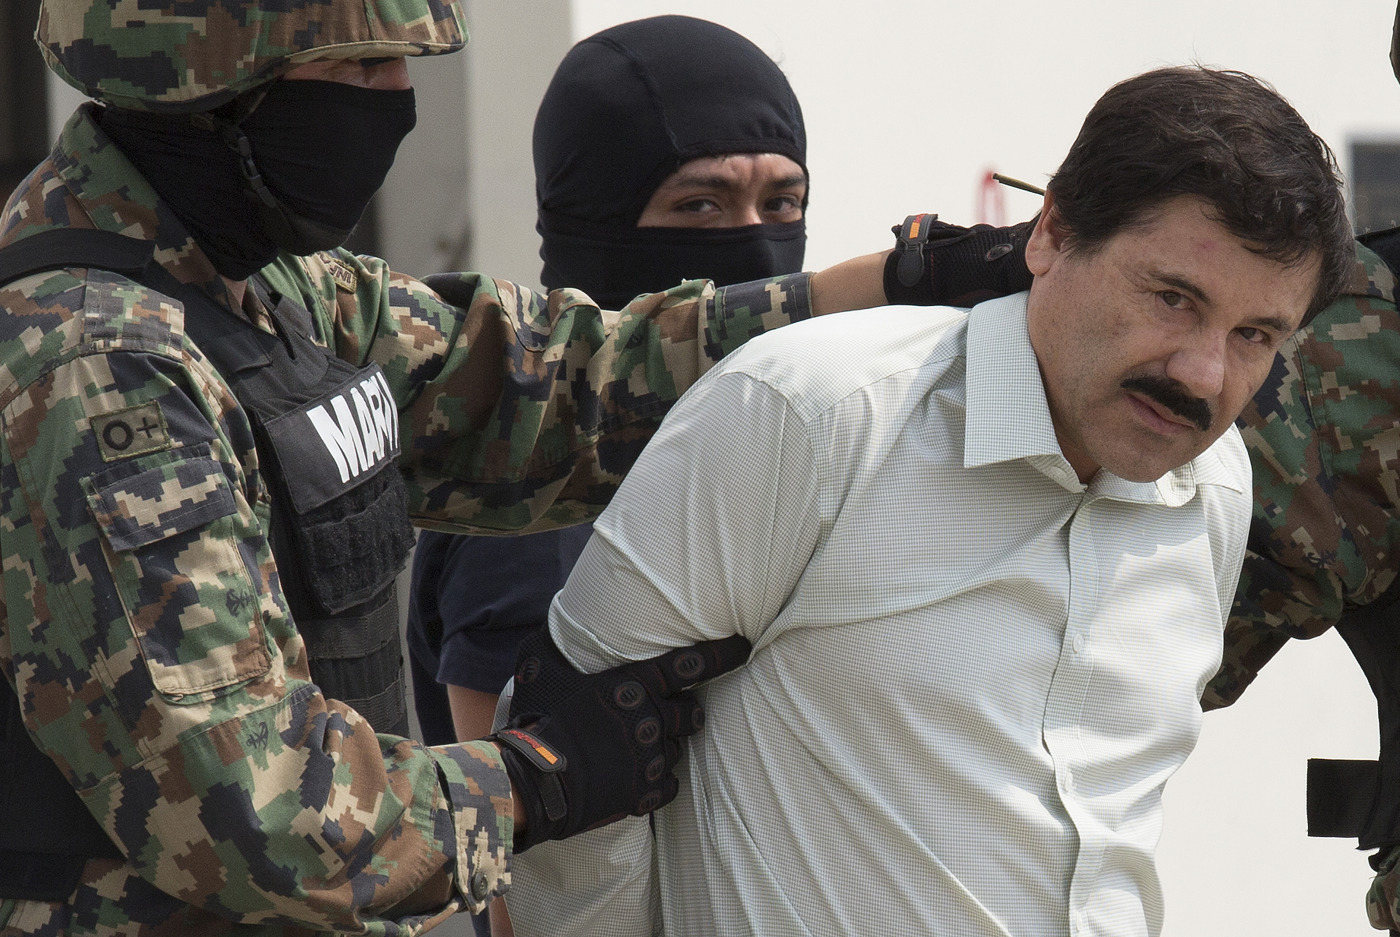 The drug trafficker Joaquín “El Chapo” Guzmán, guarded by members of Mexican navy, was arrested at a hotel in Mexico on Feb. 22, 2014 (Bloomberg&mdash;Getty Images)